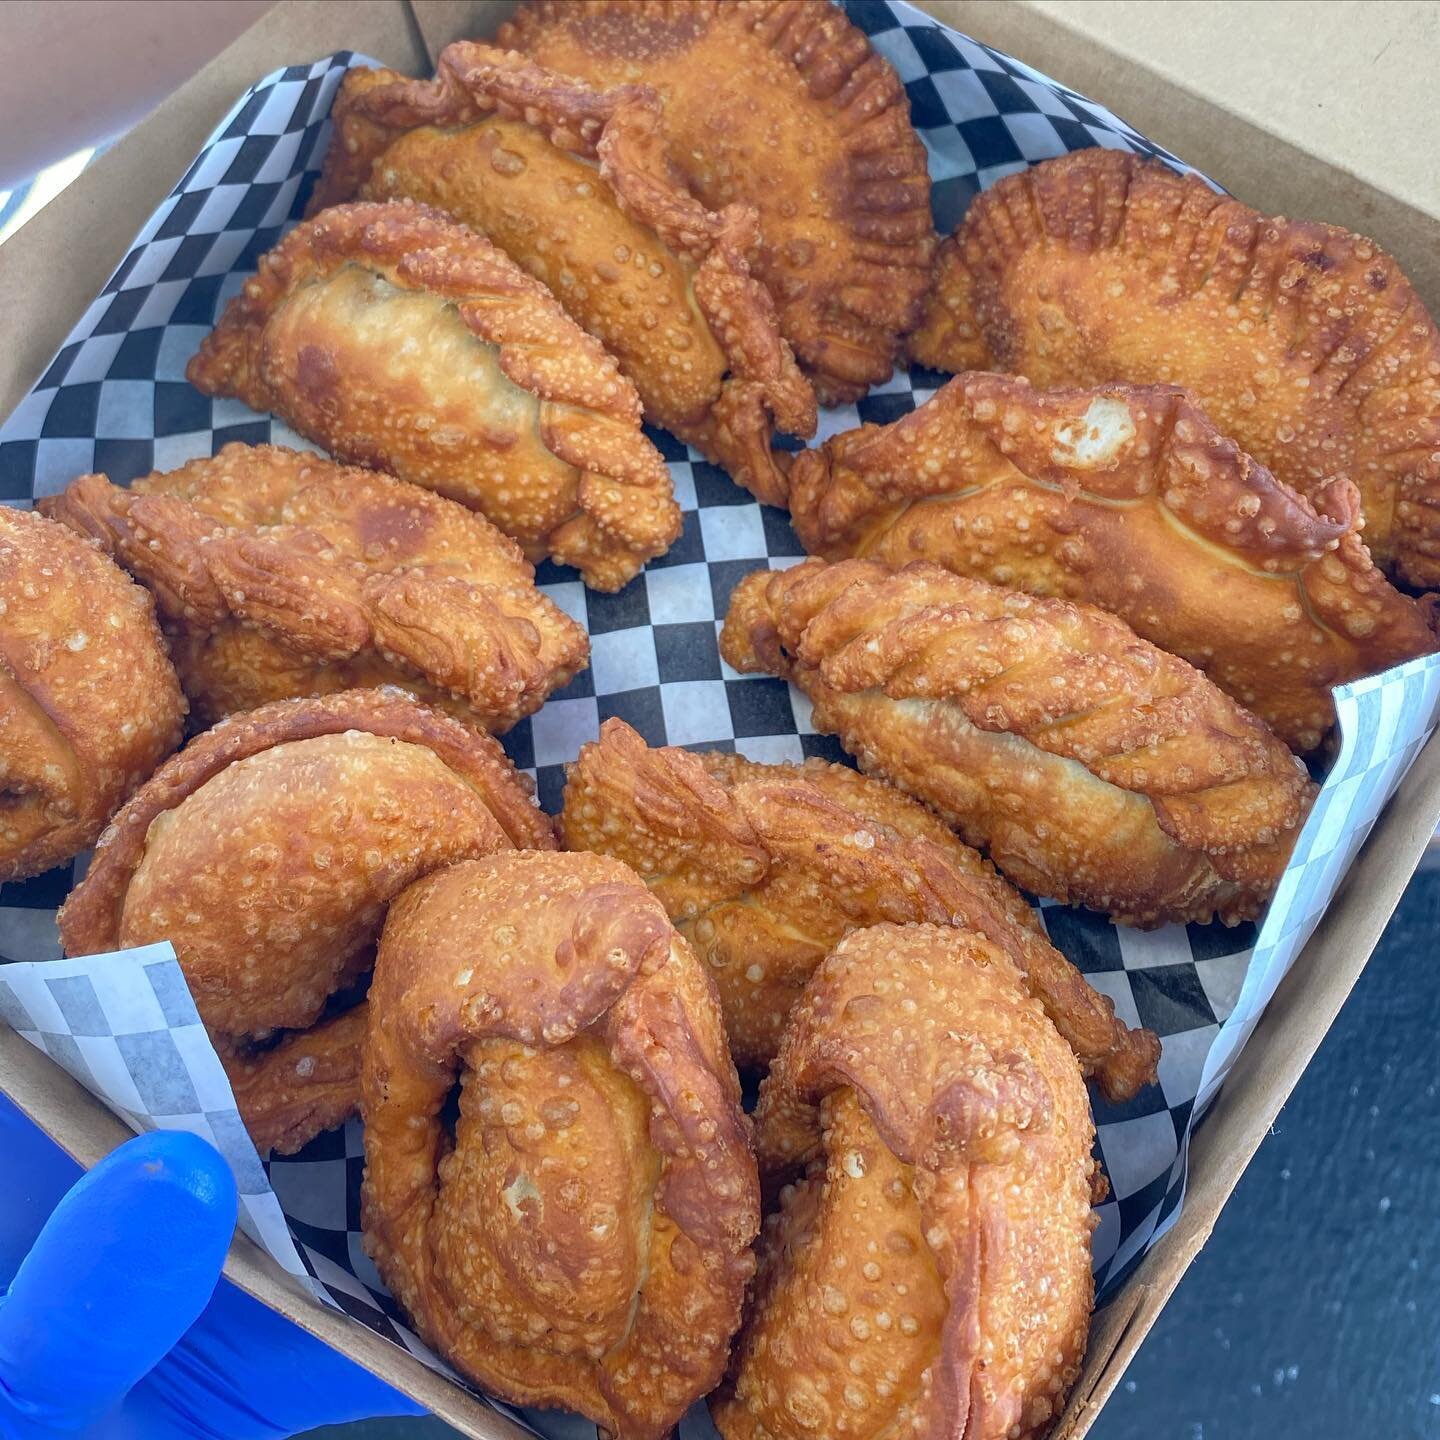 don&rsquo;t pass by on these empanadas 
they&rsquo;ll make your day better ☀️ 

Address and time in bio 🔥